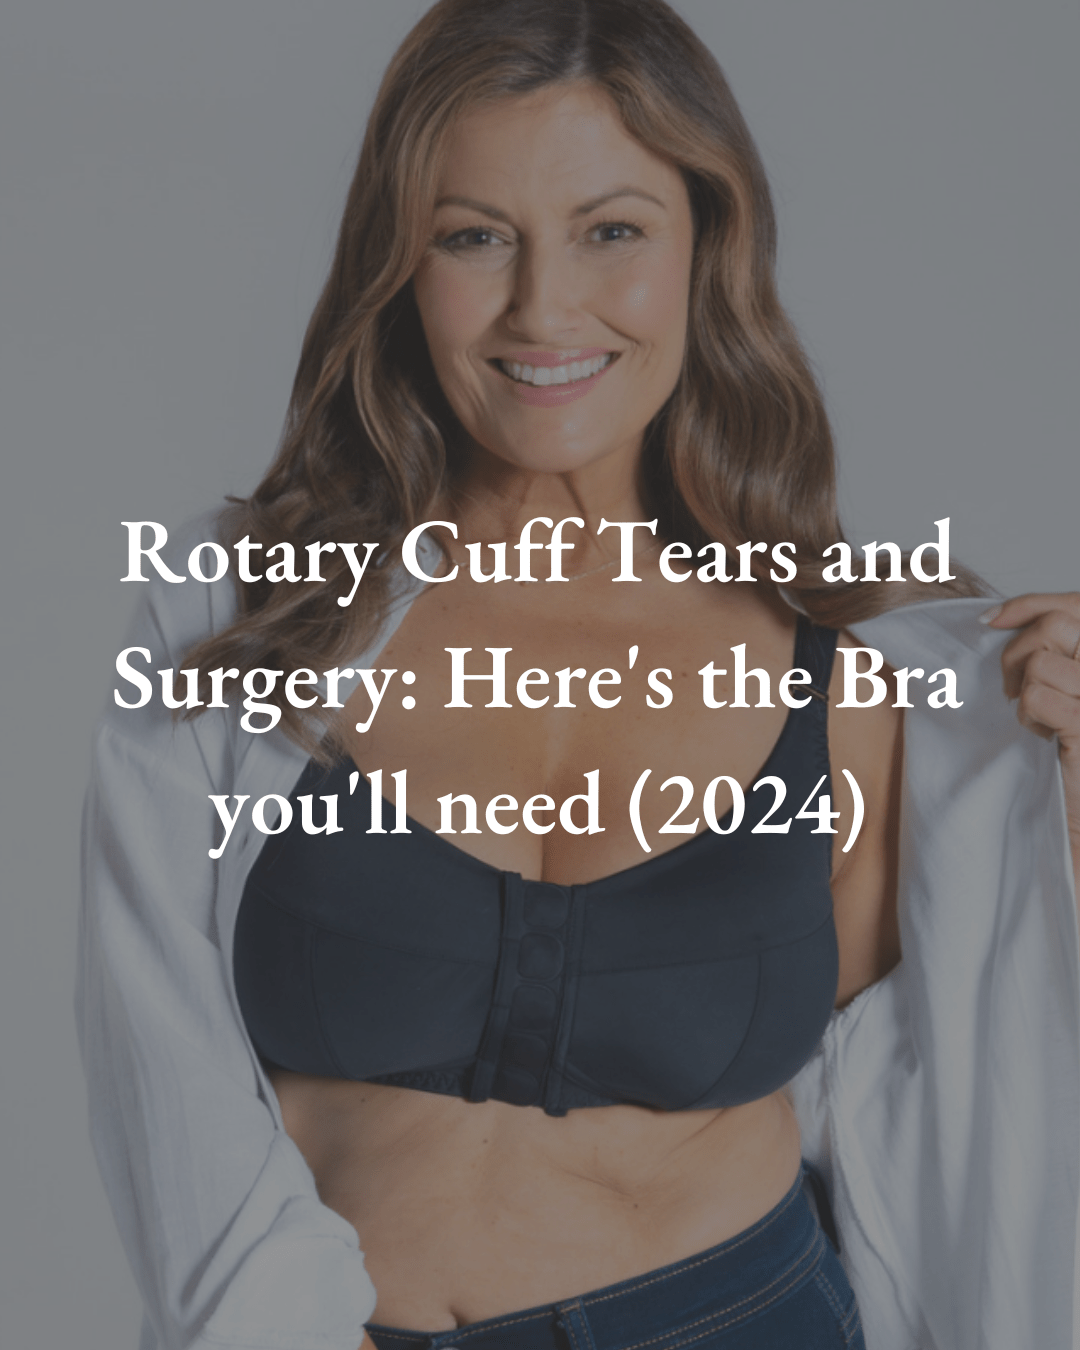 Rotary Cuff Tears and Surgery: Here's the Bra You'll Need (2024